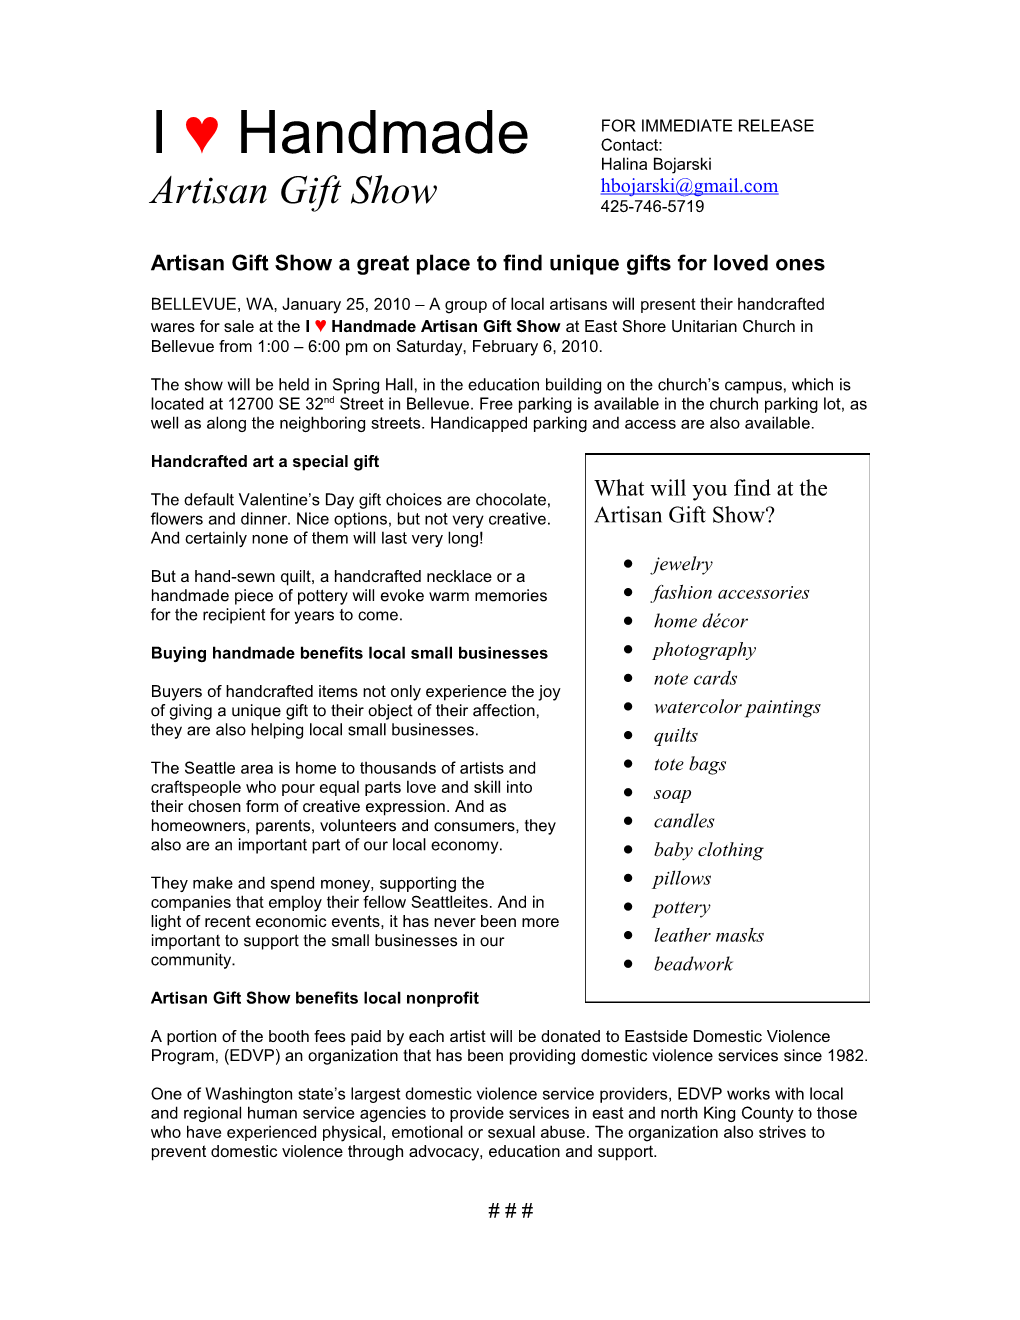 Artisan Gift Show a Great Place to Find Unique Gifts for Loved Ones